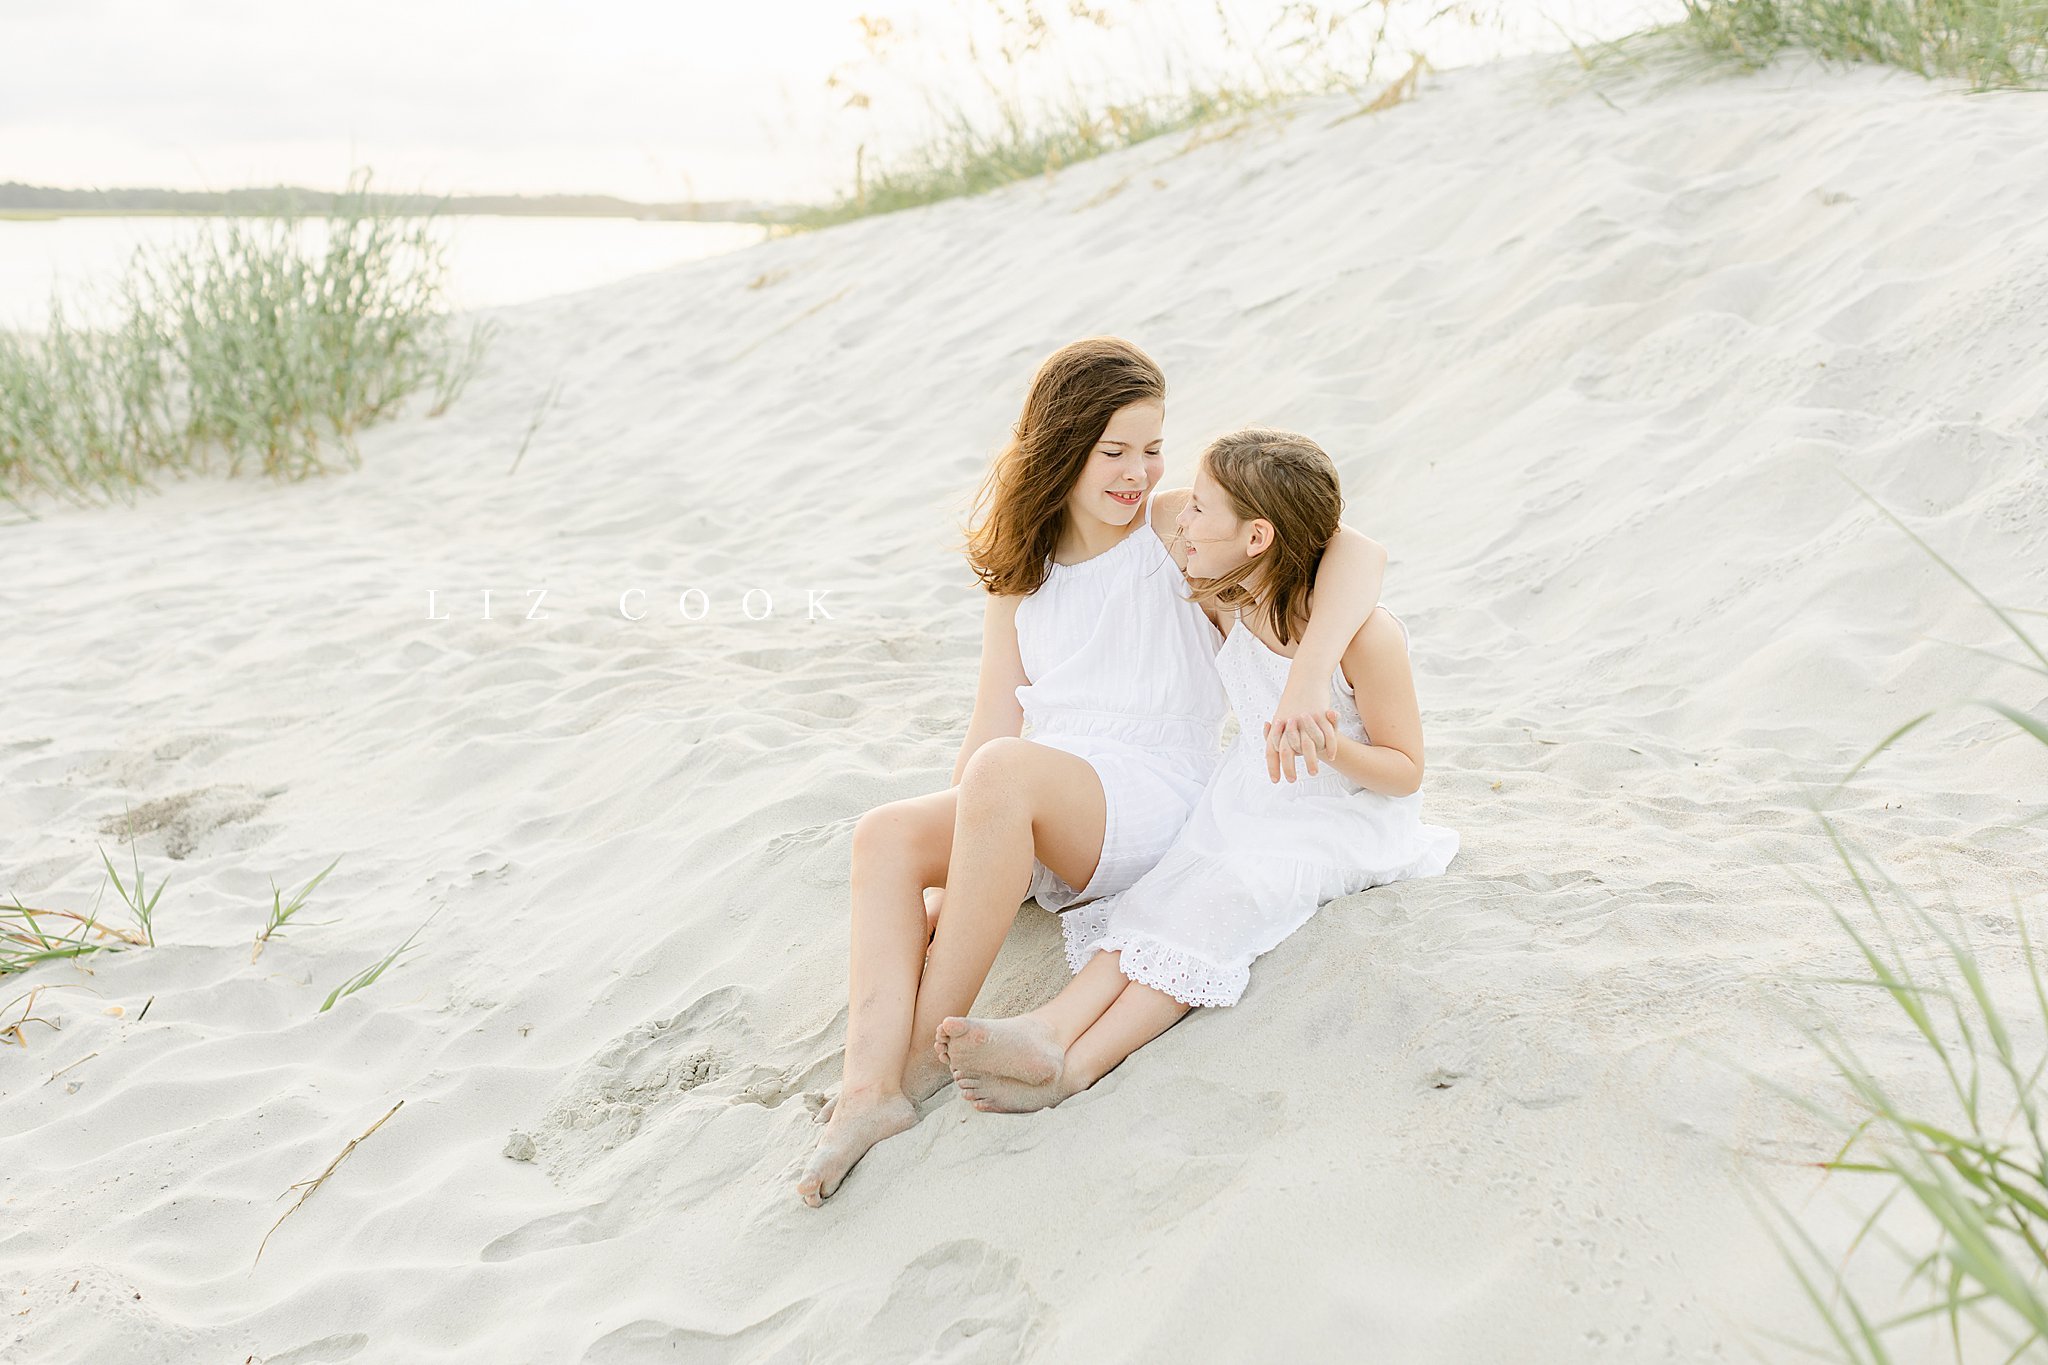 maternity-pictures-on-beach-liz-cook-photography-caroline-jean-photography_0009.jpg